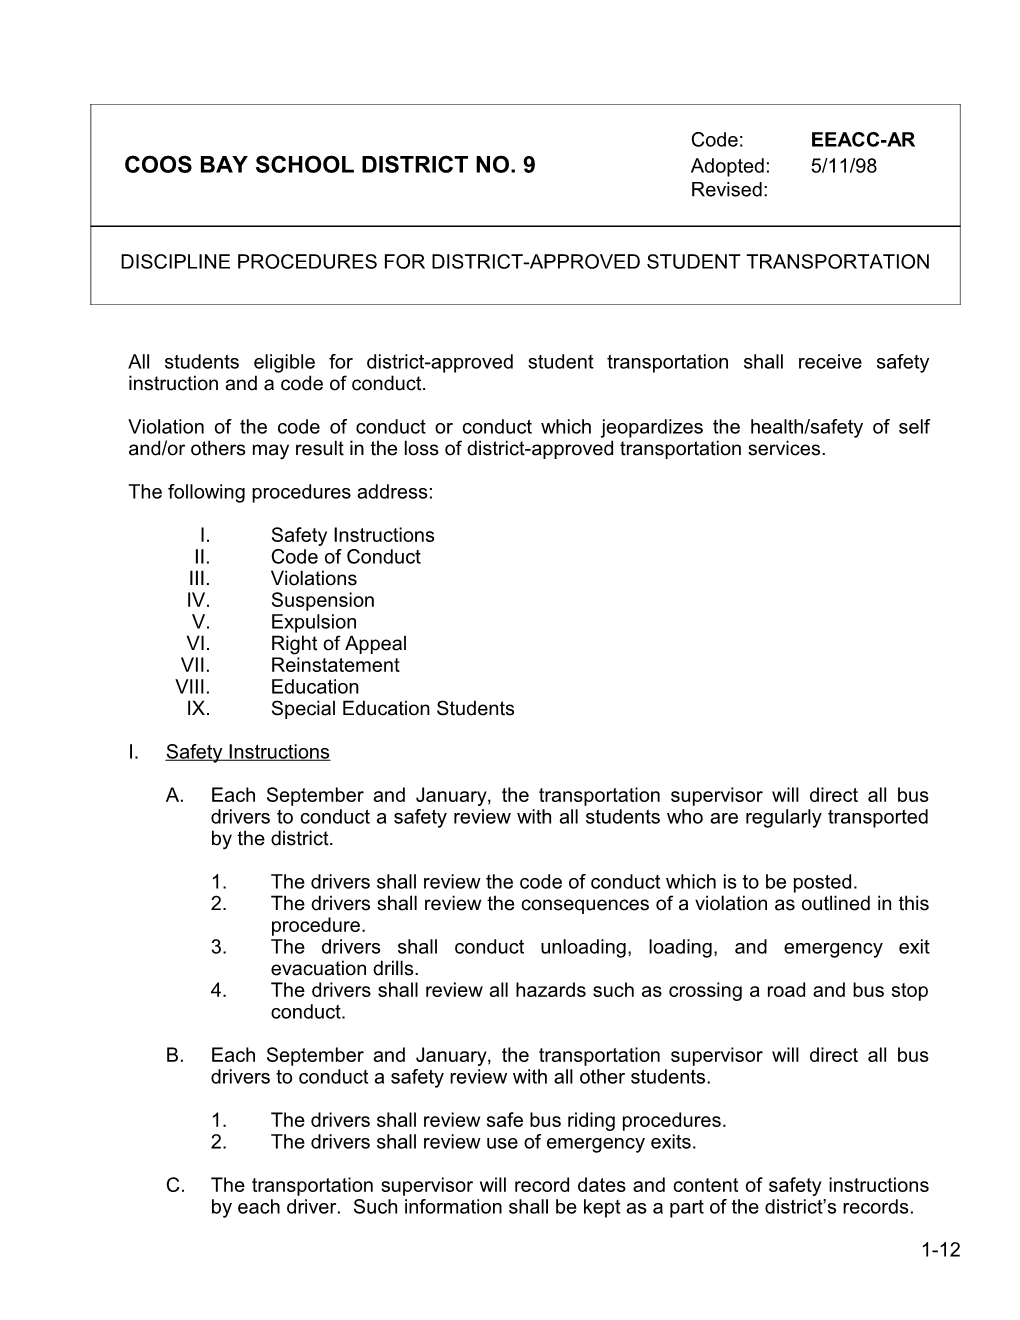 Discipline Procedures for District-Approved Student Transportation - Eeacc-Ar